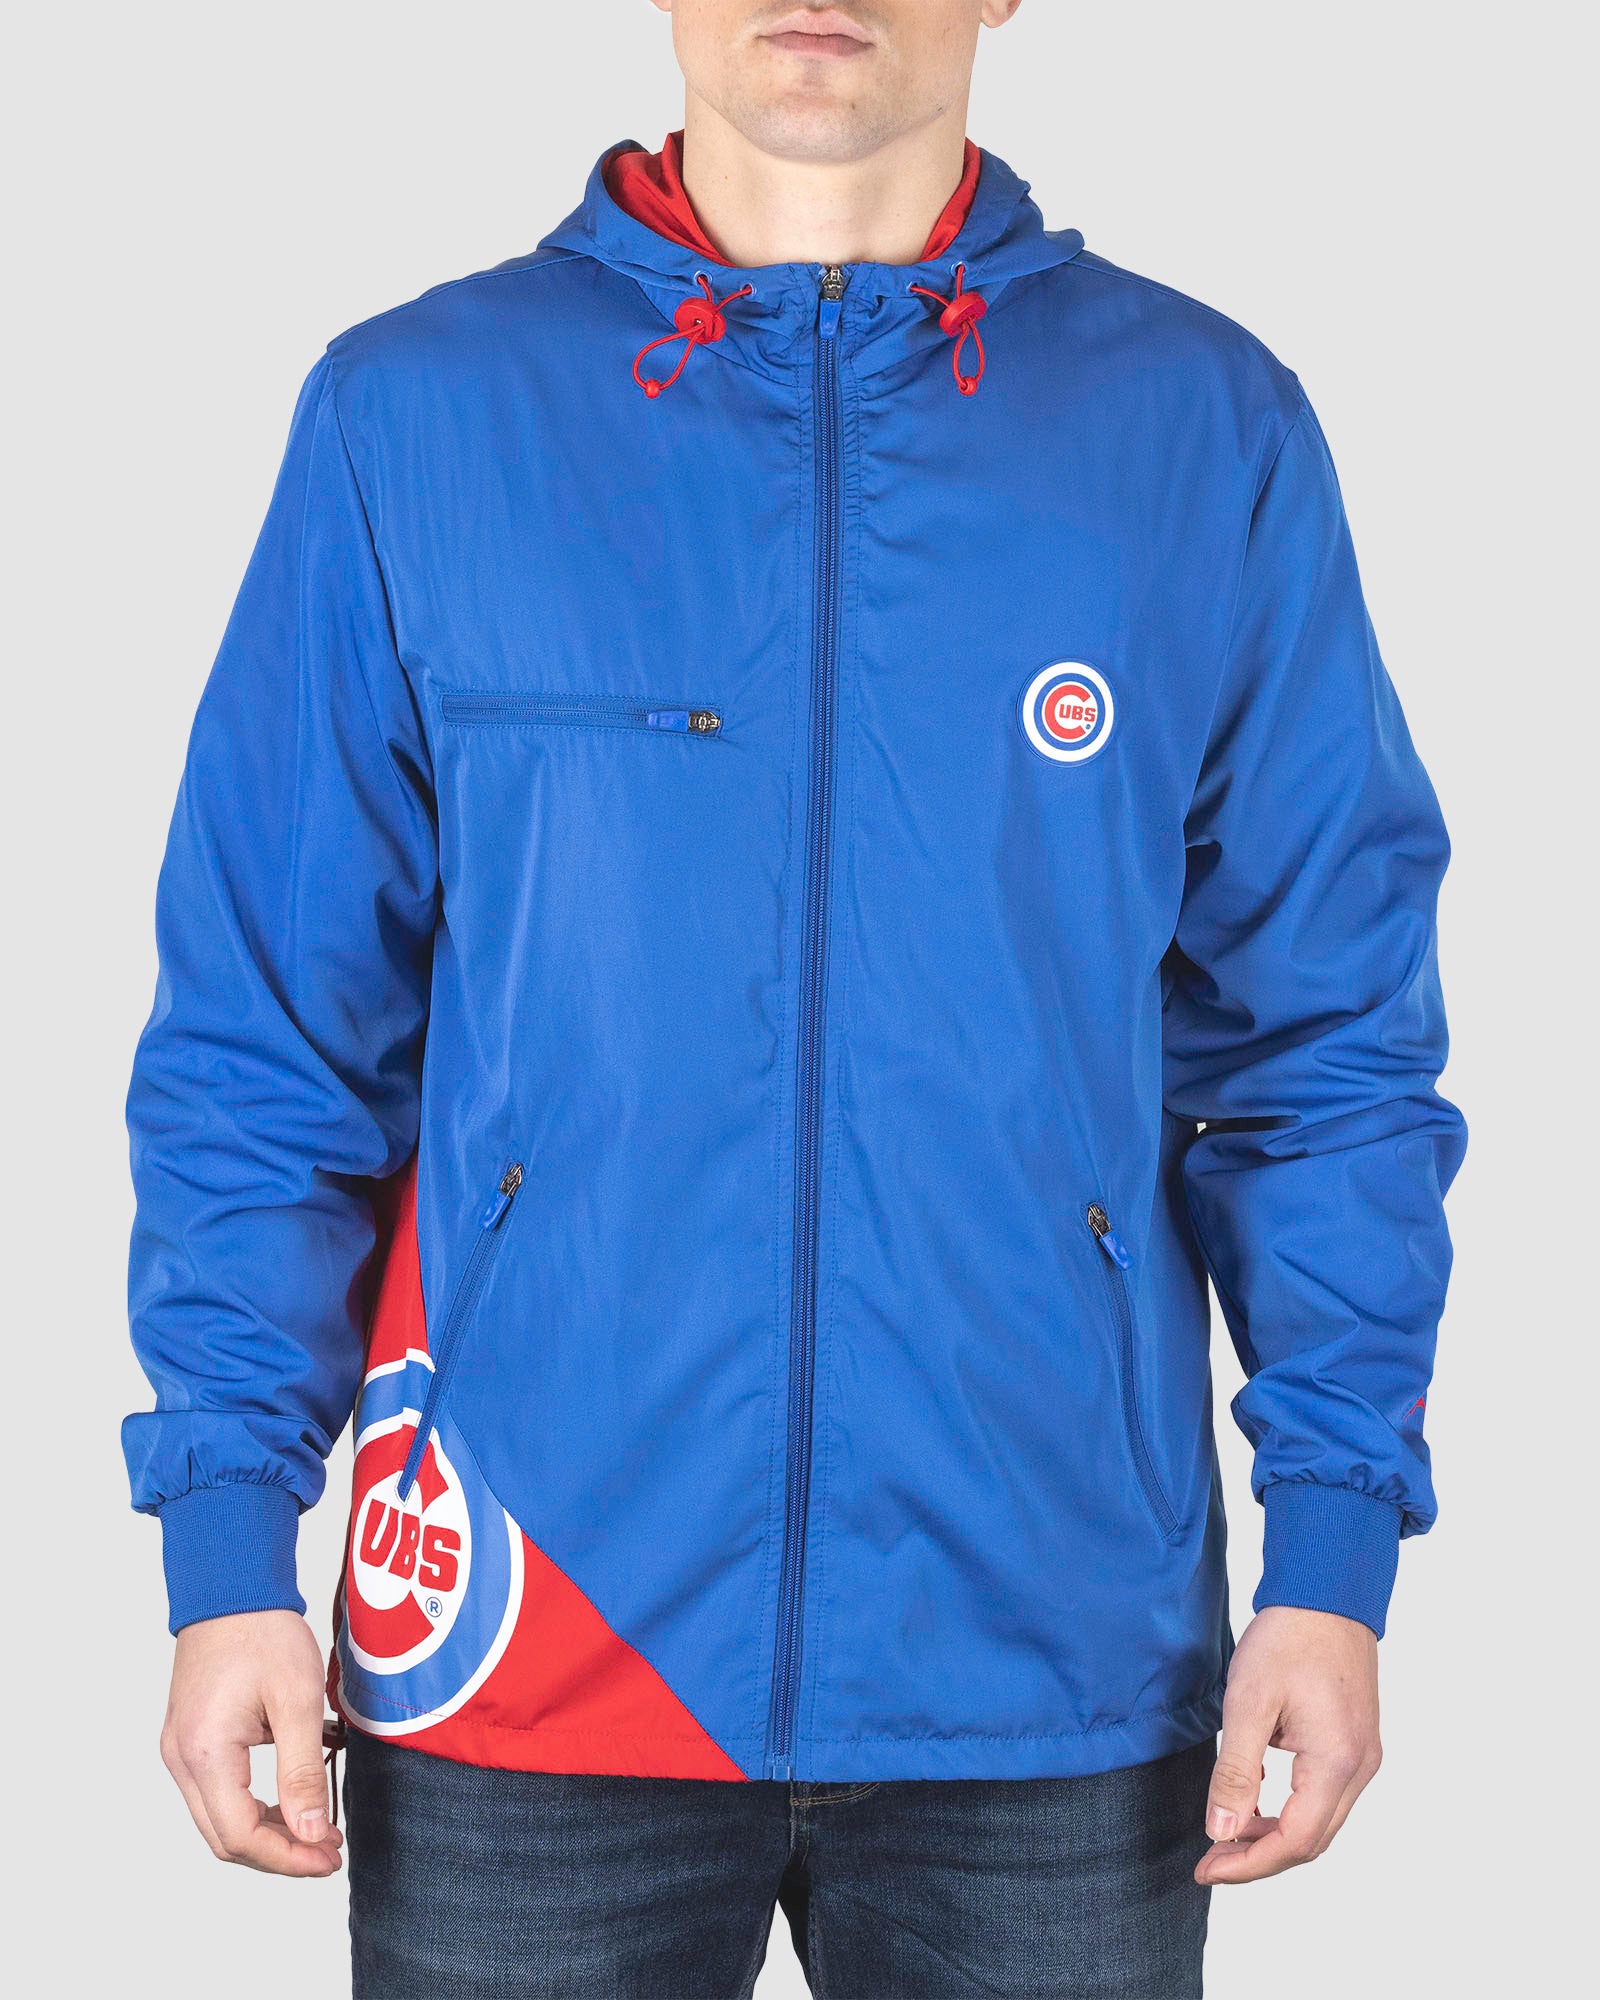 for Love Windbreaker - Chicago Cubs 3XL